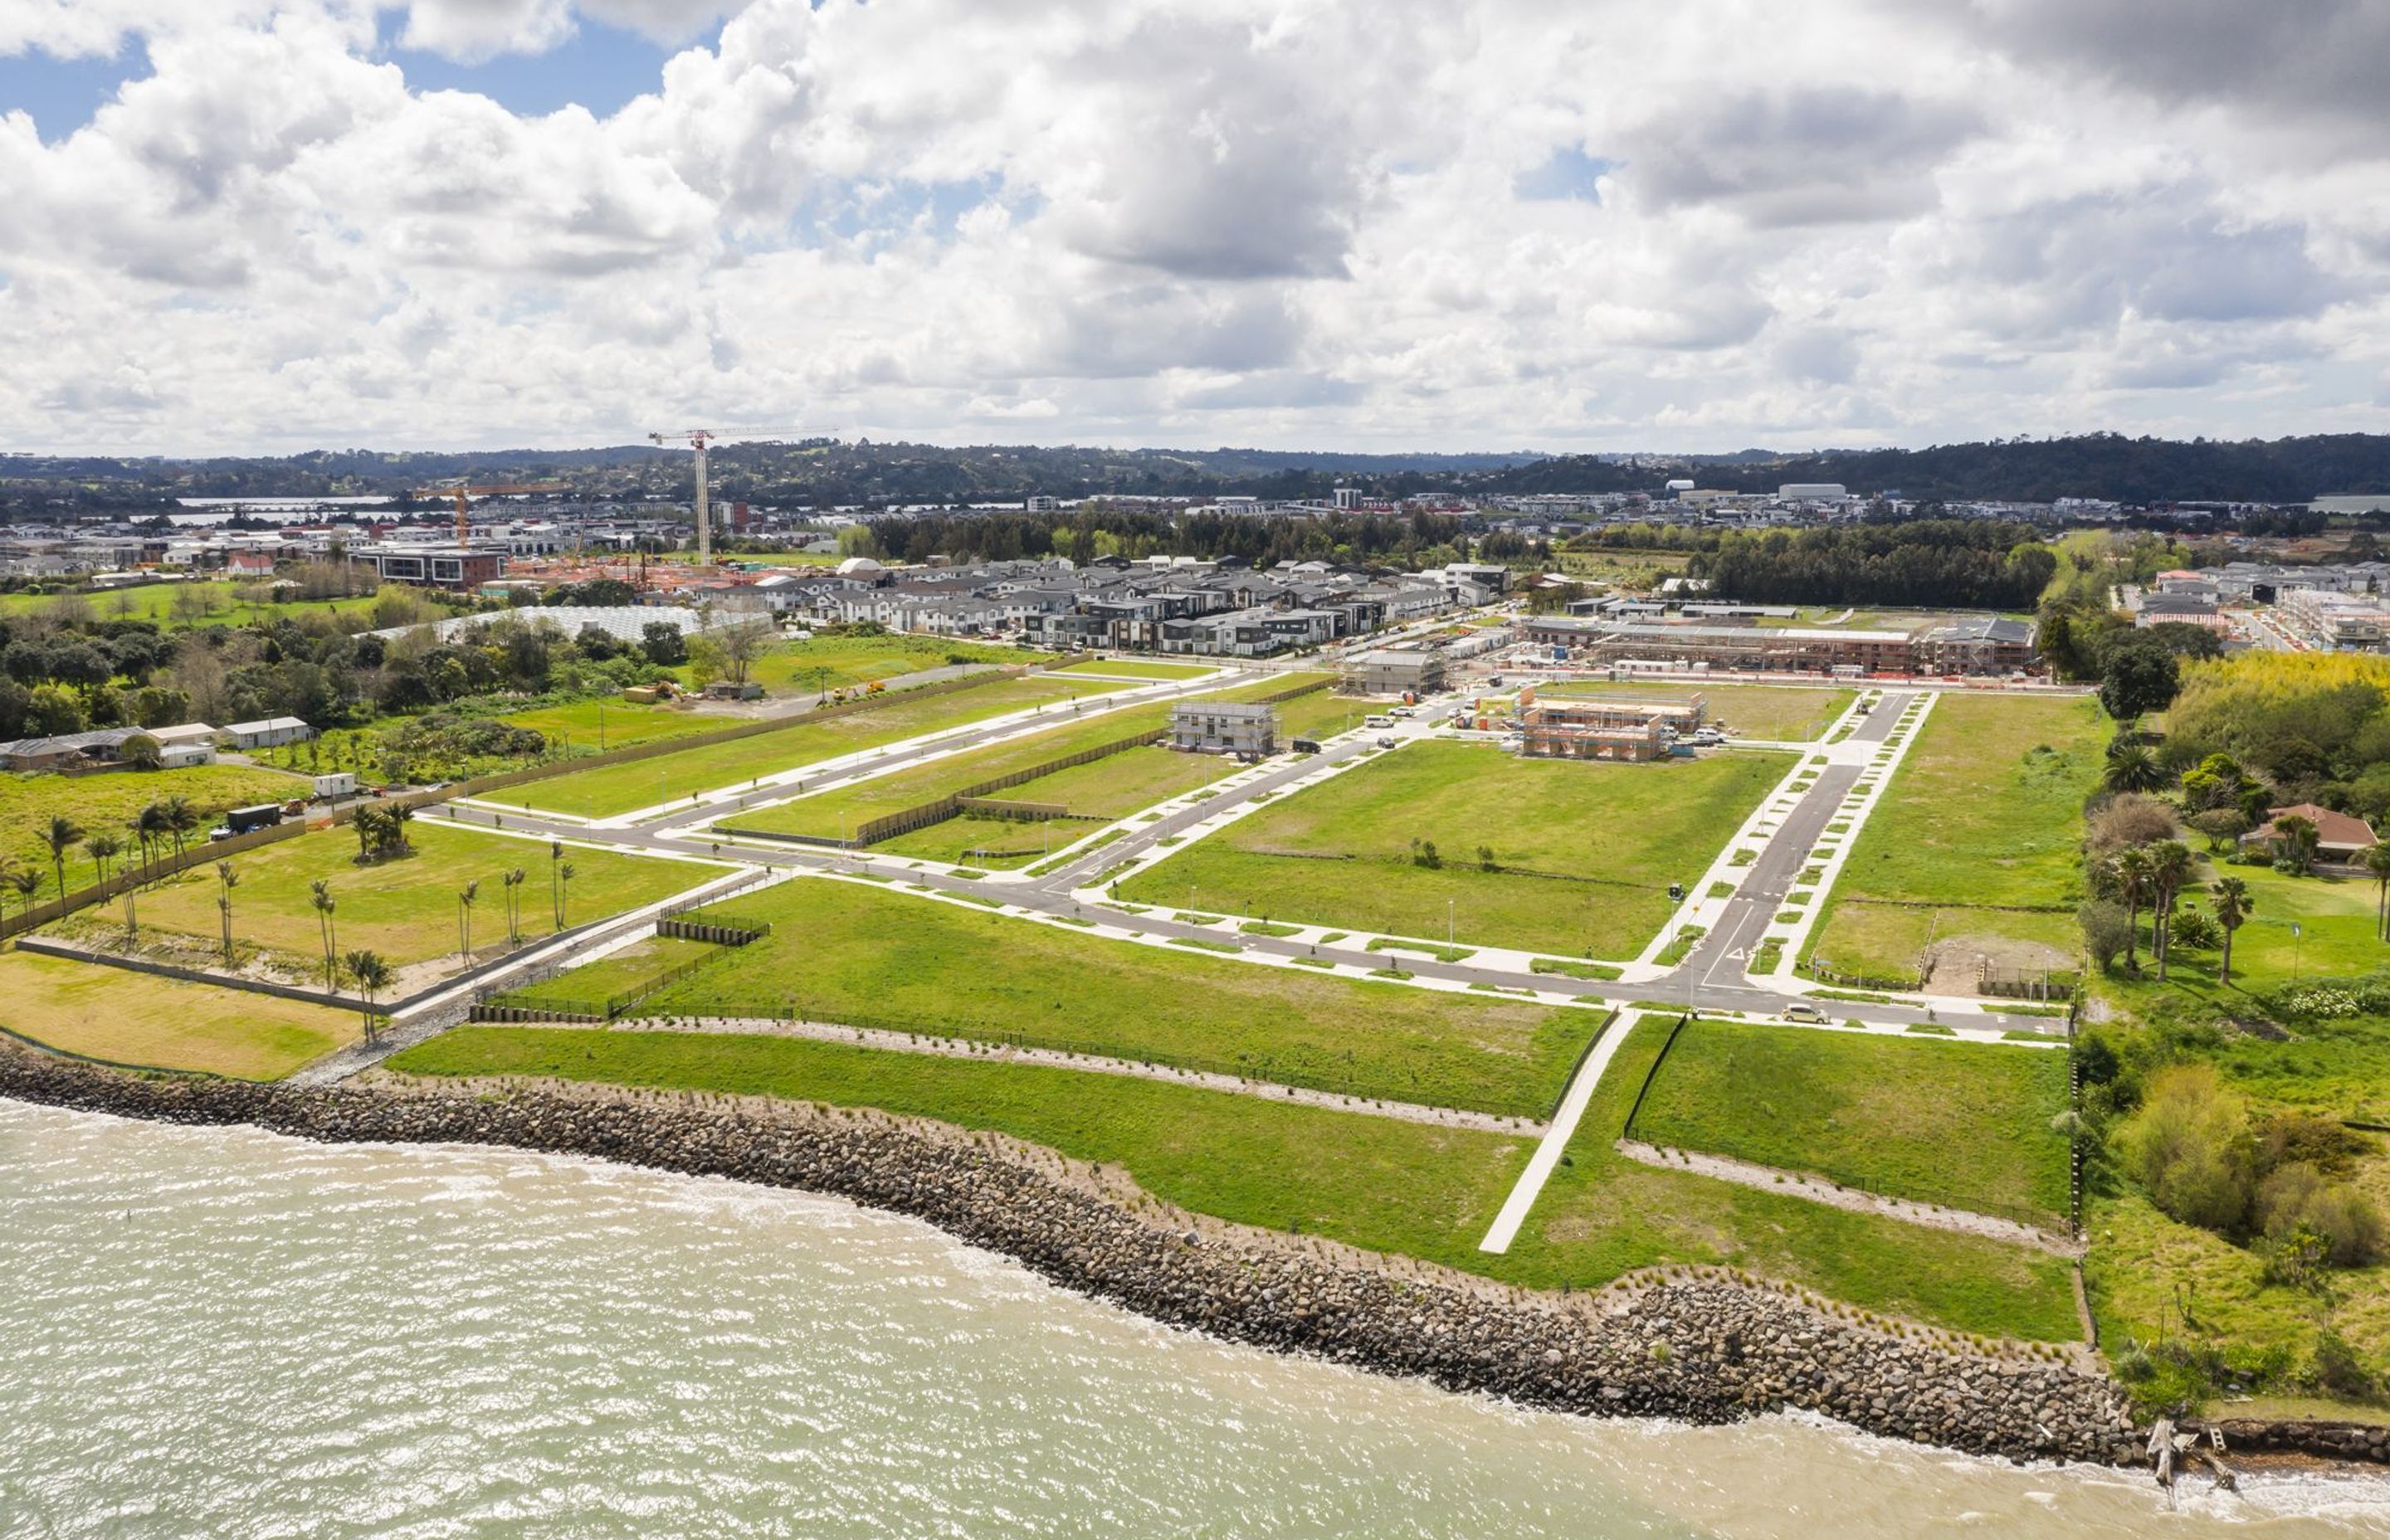 CPMC provided development management and project management services throughout the duration of this residential subdivision project in Scott Point, Hobsonville, Auckland. The 4 ha site was subdivided successfully into 105 residential lots.